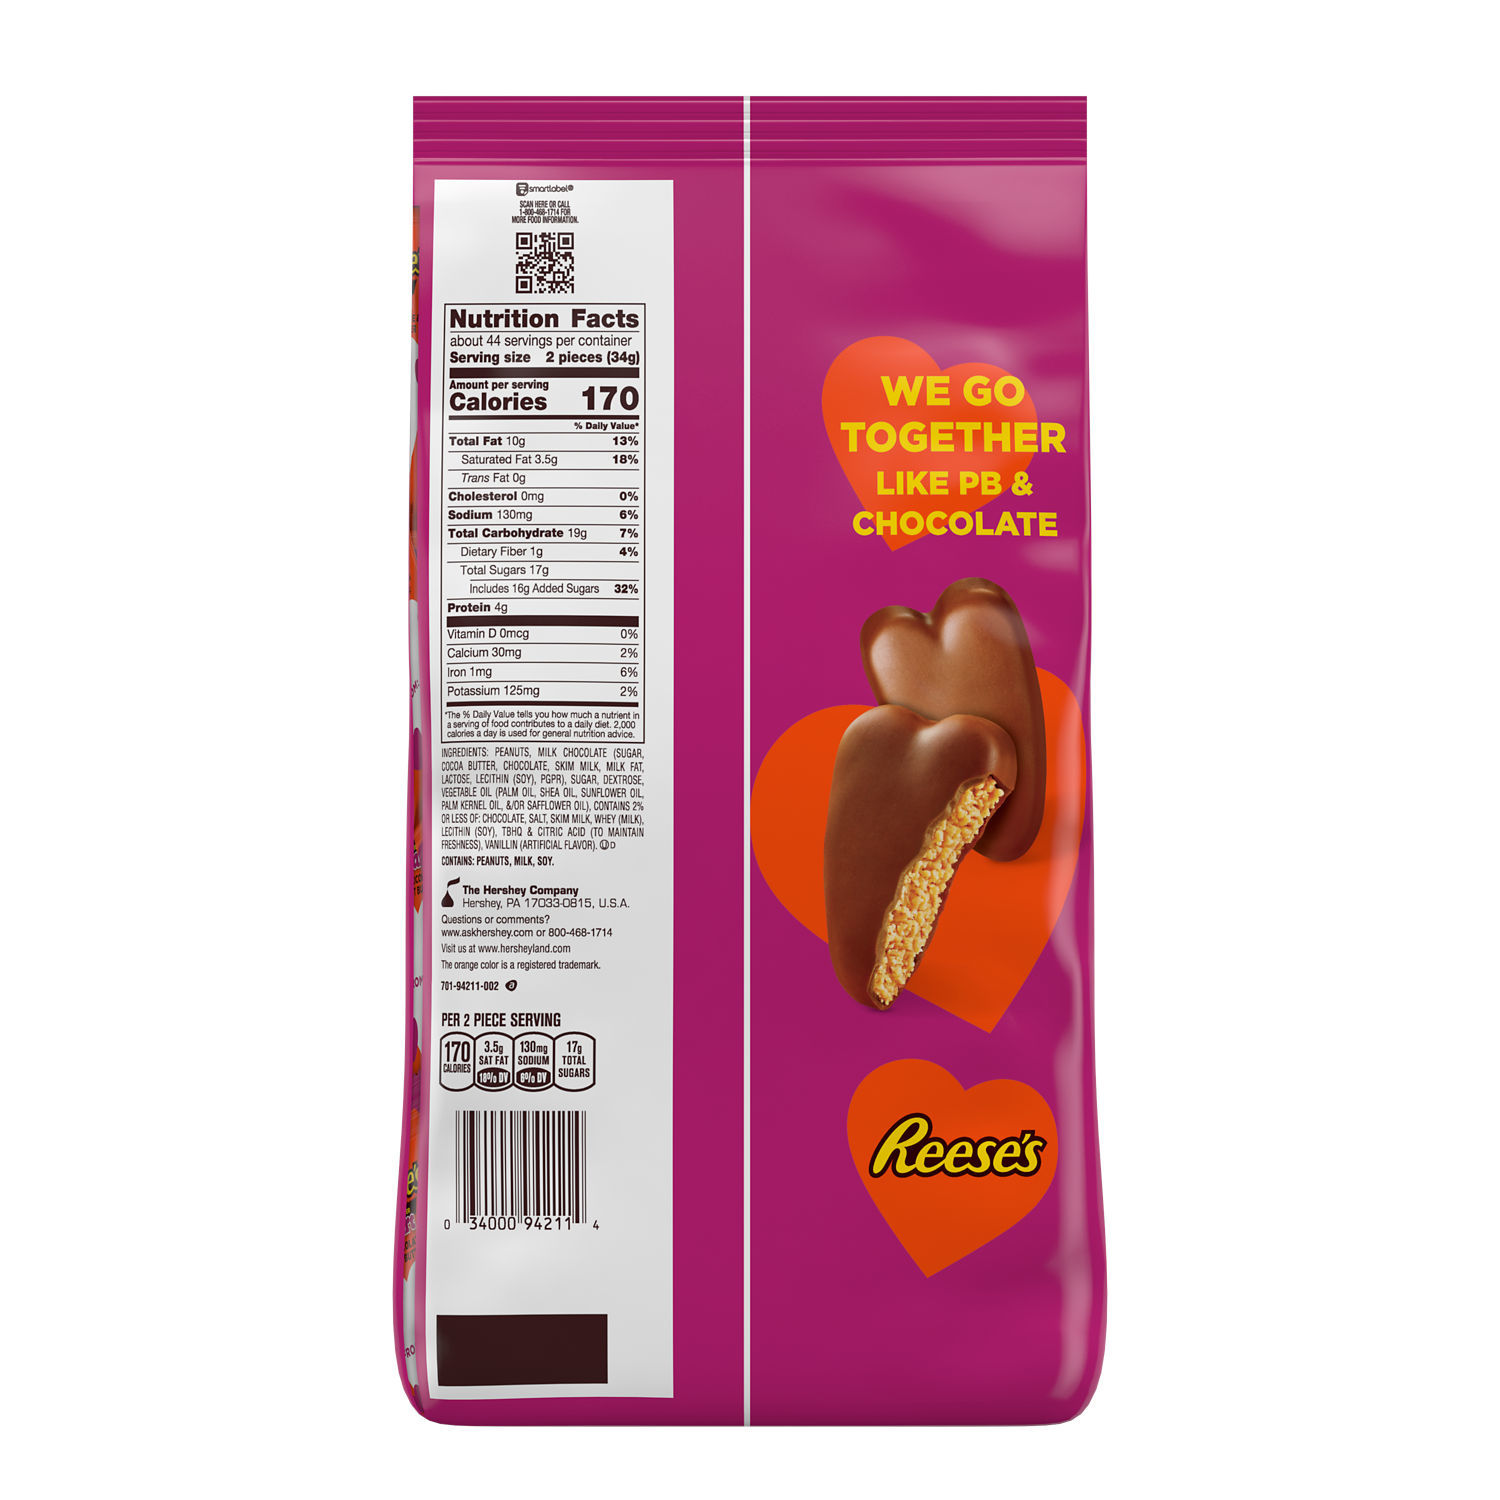 REESE'S, Milk Chocolate Peanut Butter Hearts Snack Size Candy, Valentine's Day, 52.2 oz, Bulk Bag (87 Pieces) - image 2 of 6